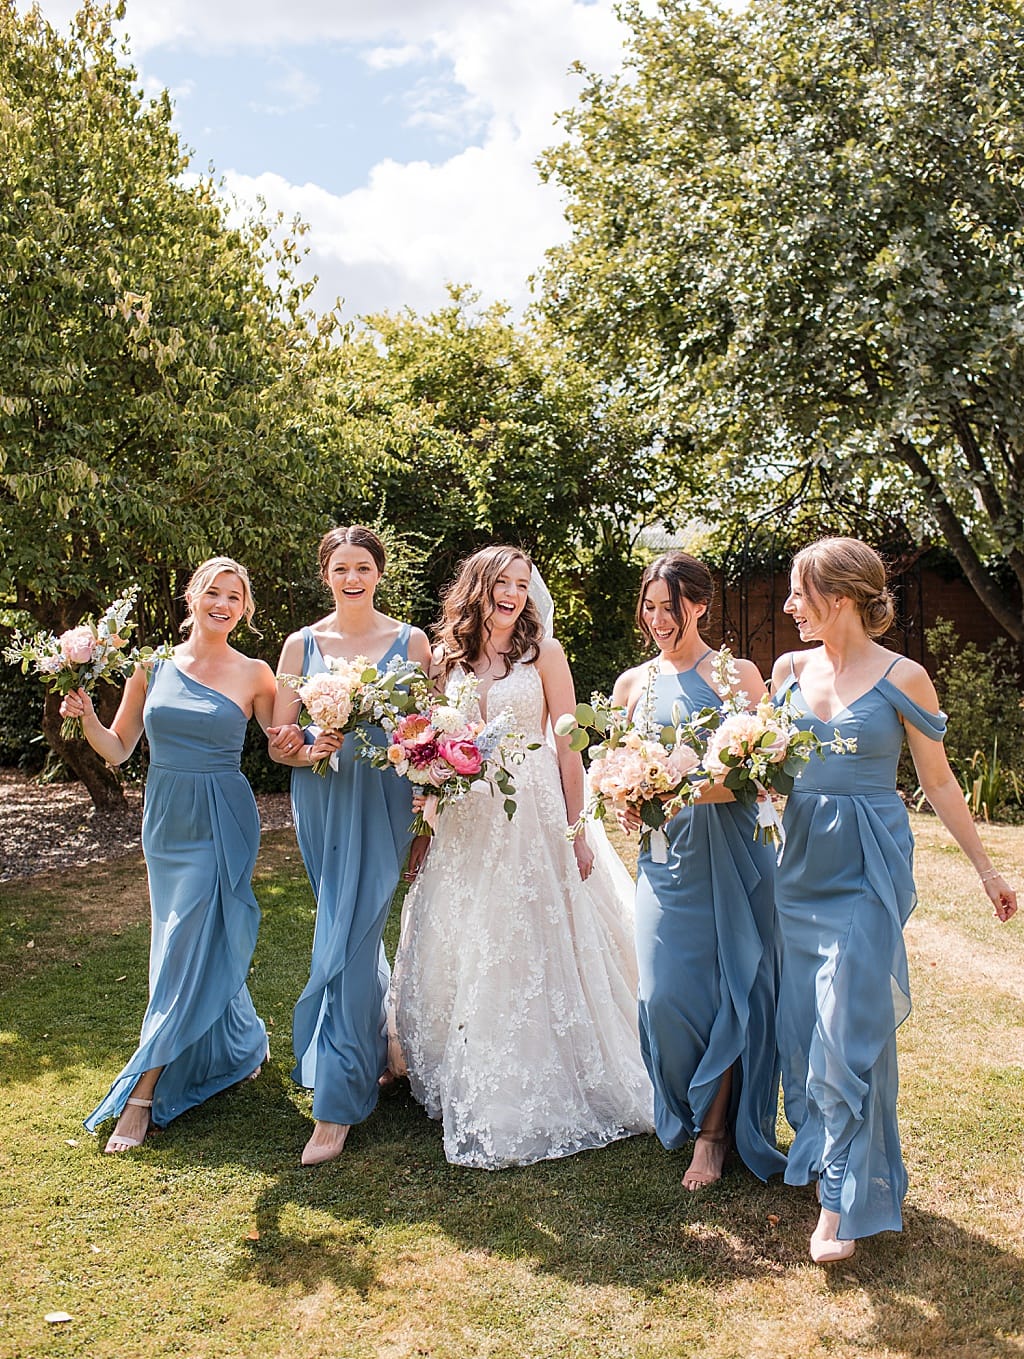 Bride and her Bridesmaids wearing blue chiffon dresses walk together laughing in the garden at Curradine Barn